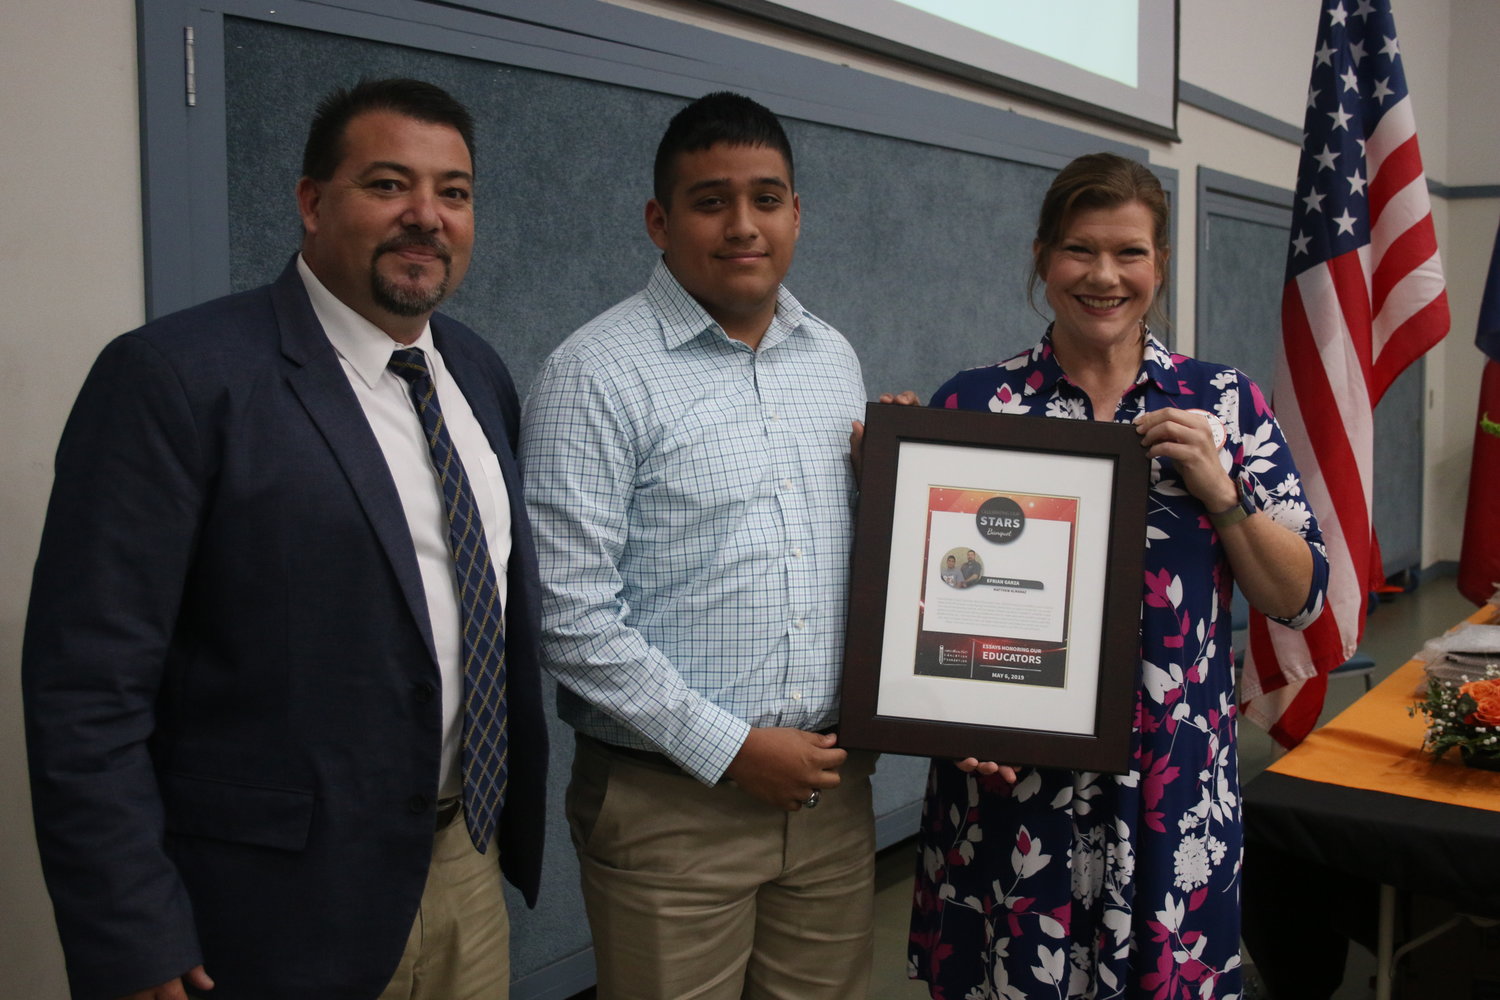 Matthew Almaraz recognized Coach Efrain Garza, who was always there to help him when Almaraz needed it. “He has a determination to make sure every student success at whatever they do.”